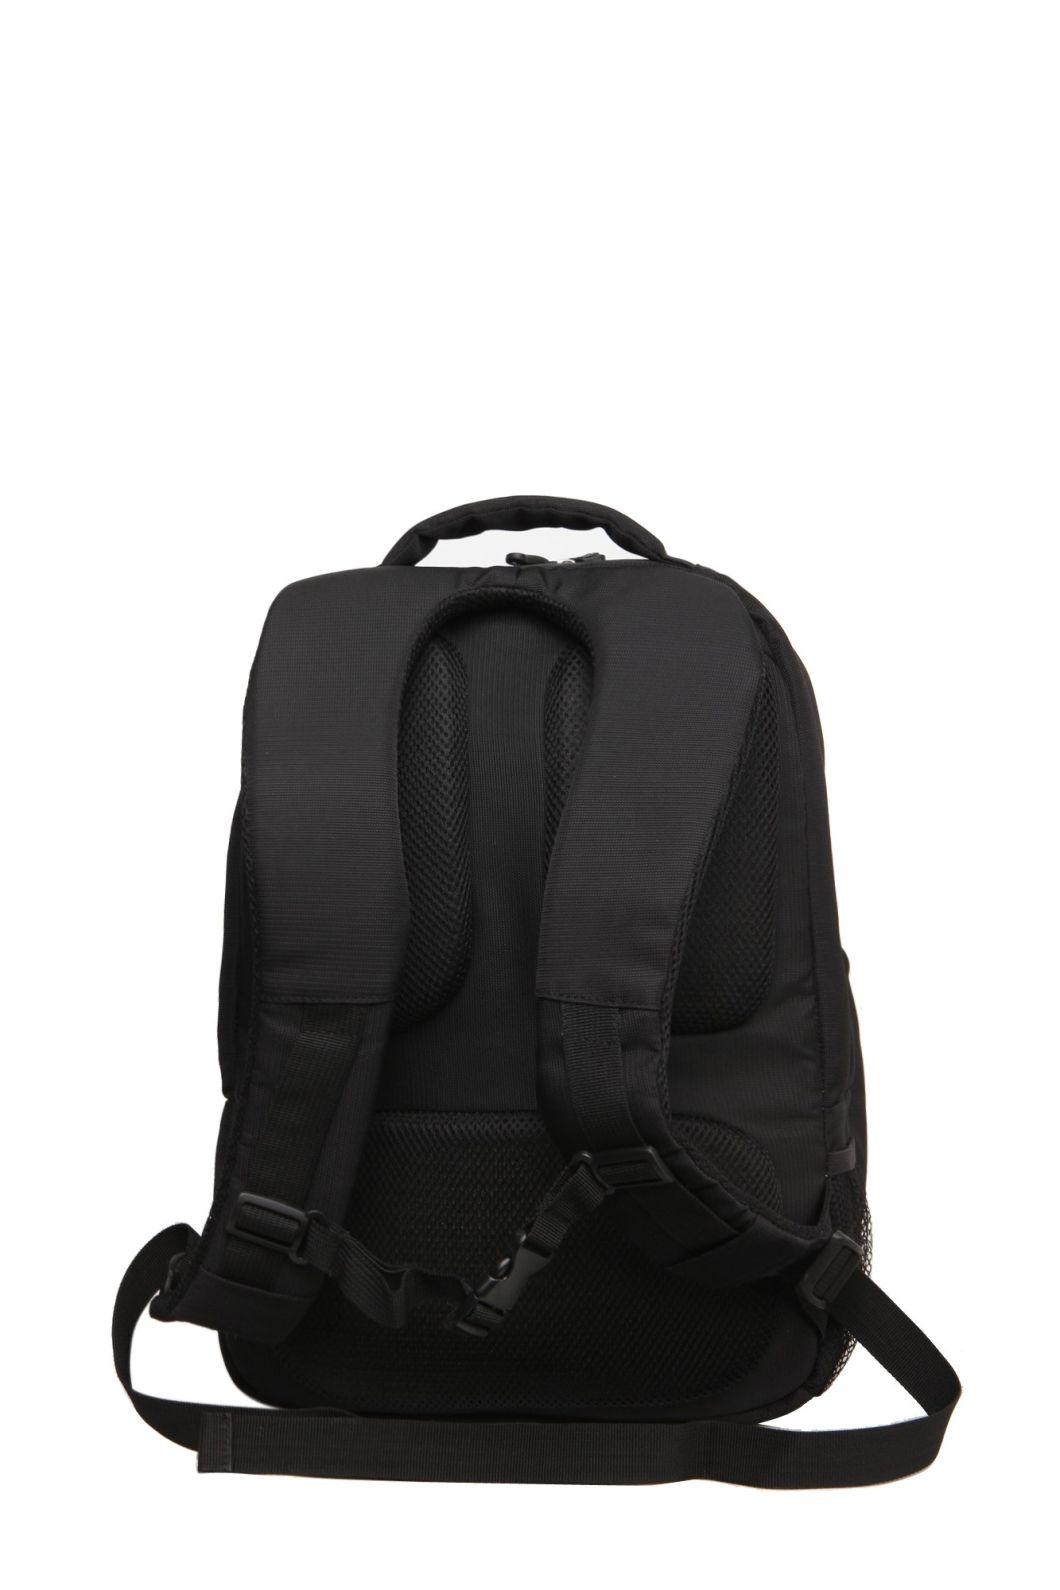 Backpack Laptop Computer Notebook Carry Fashion Nylon School Camping Bag